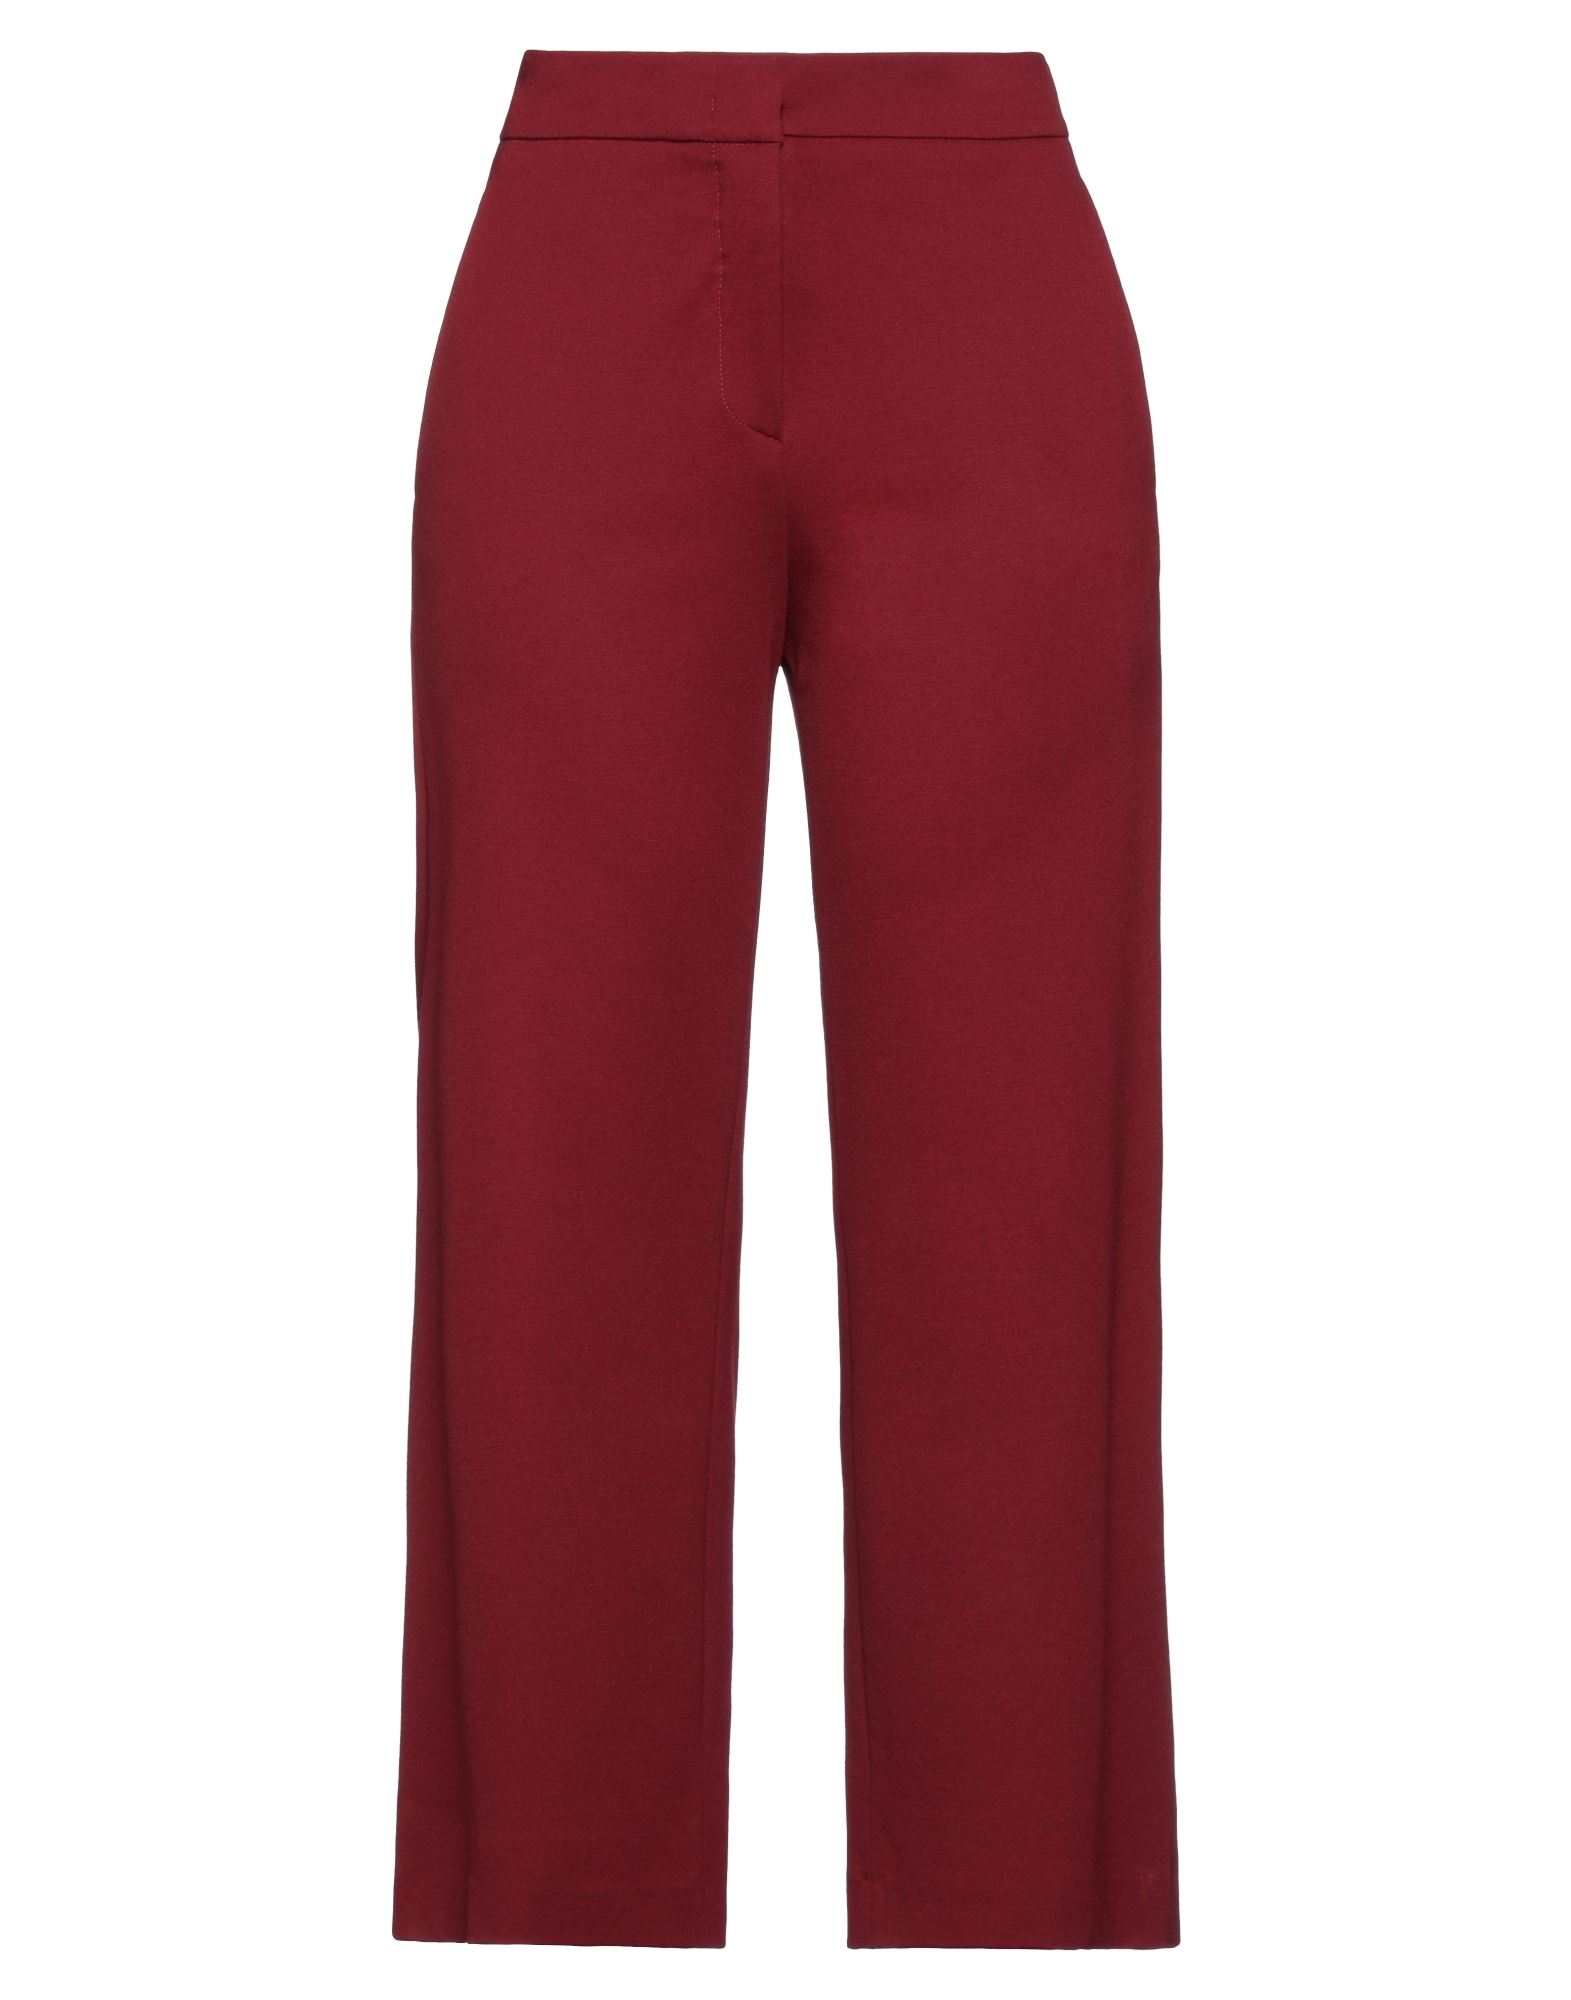 Black Label Pants In Red